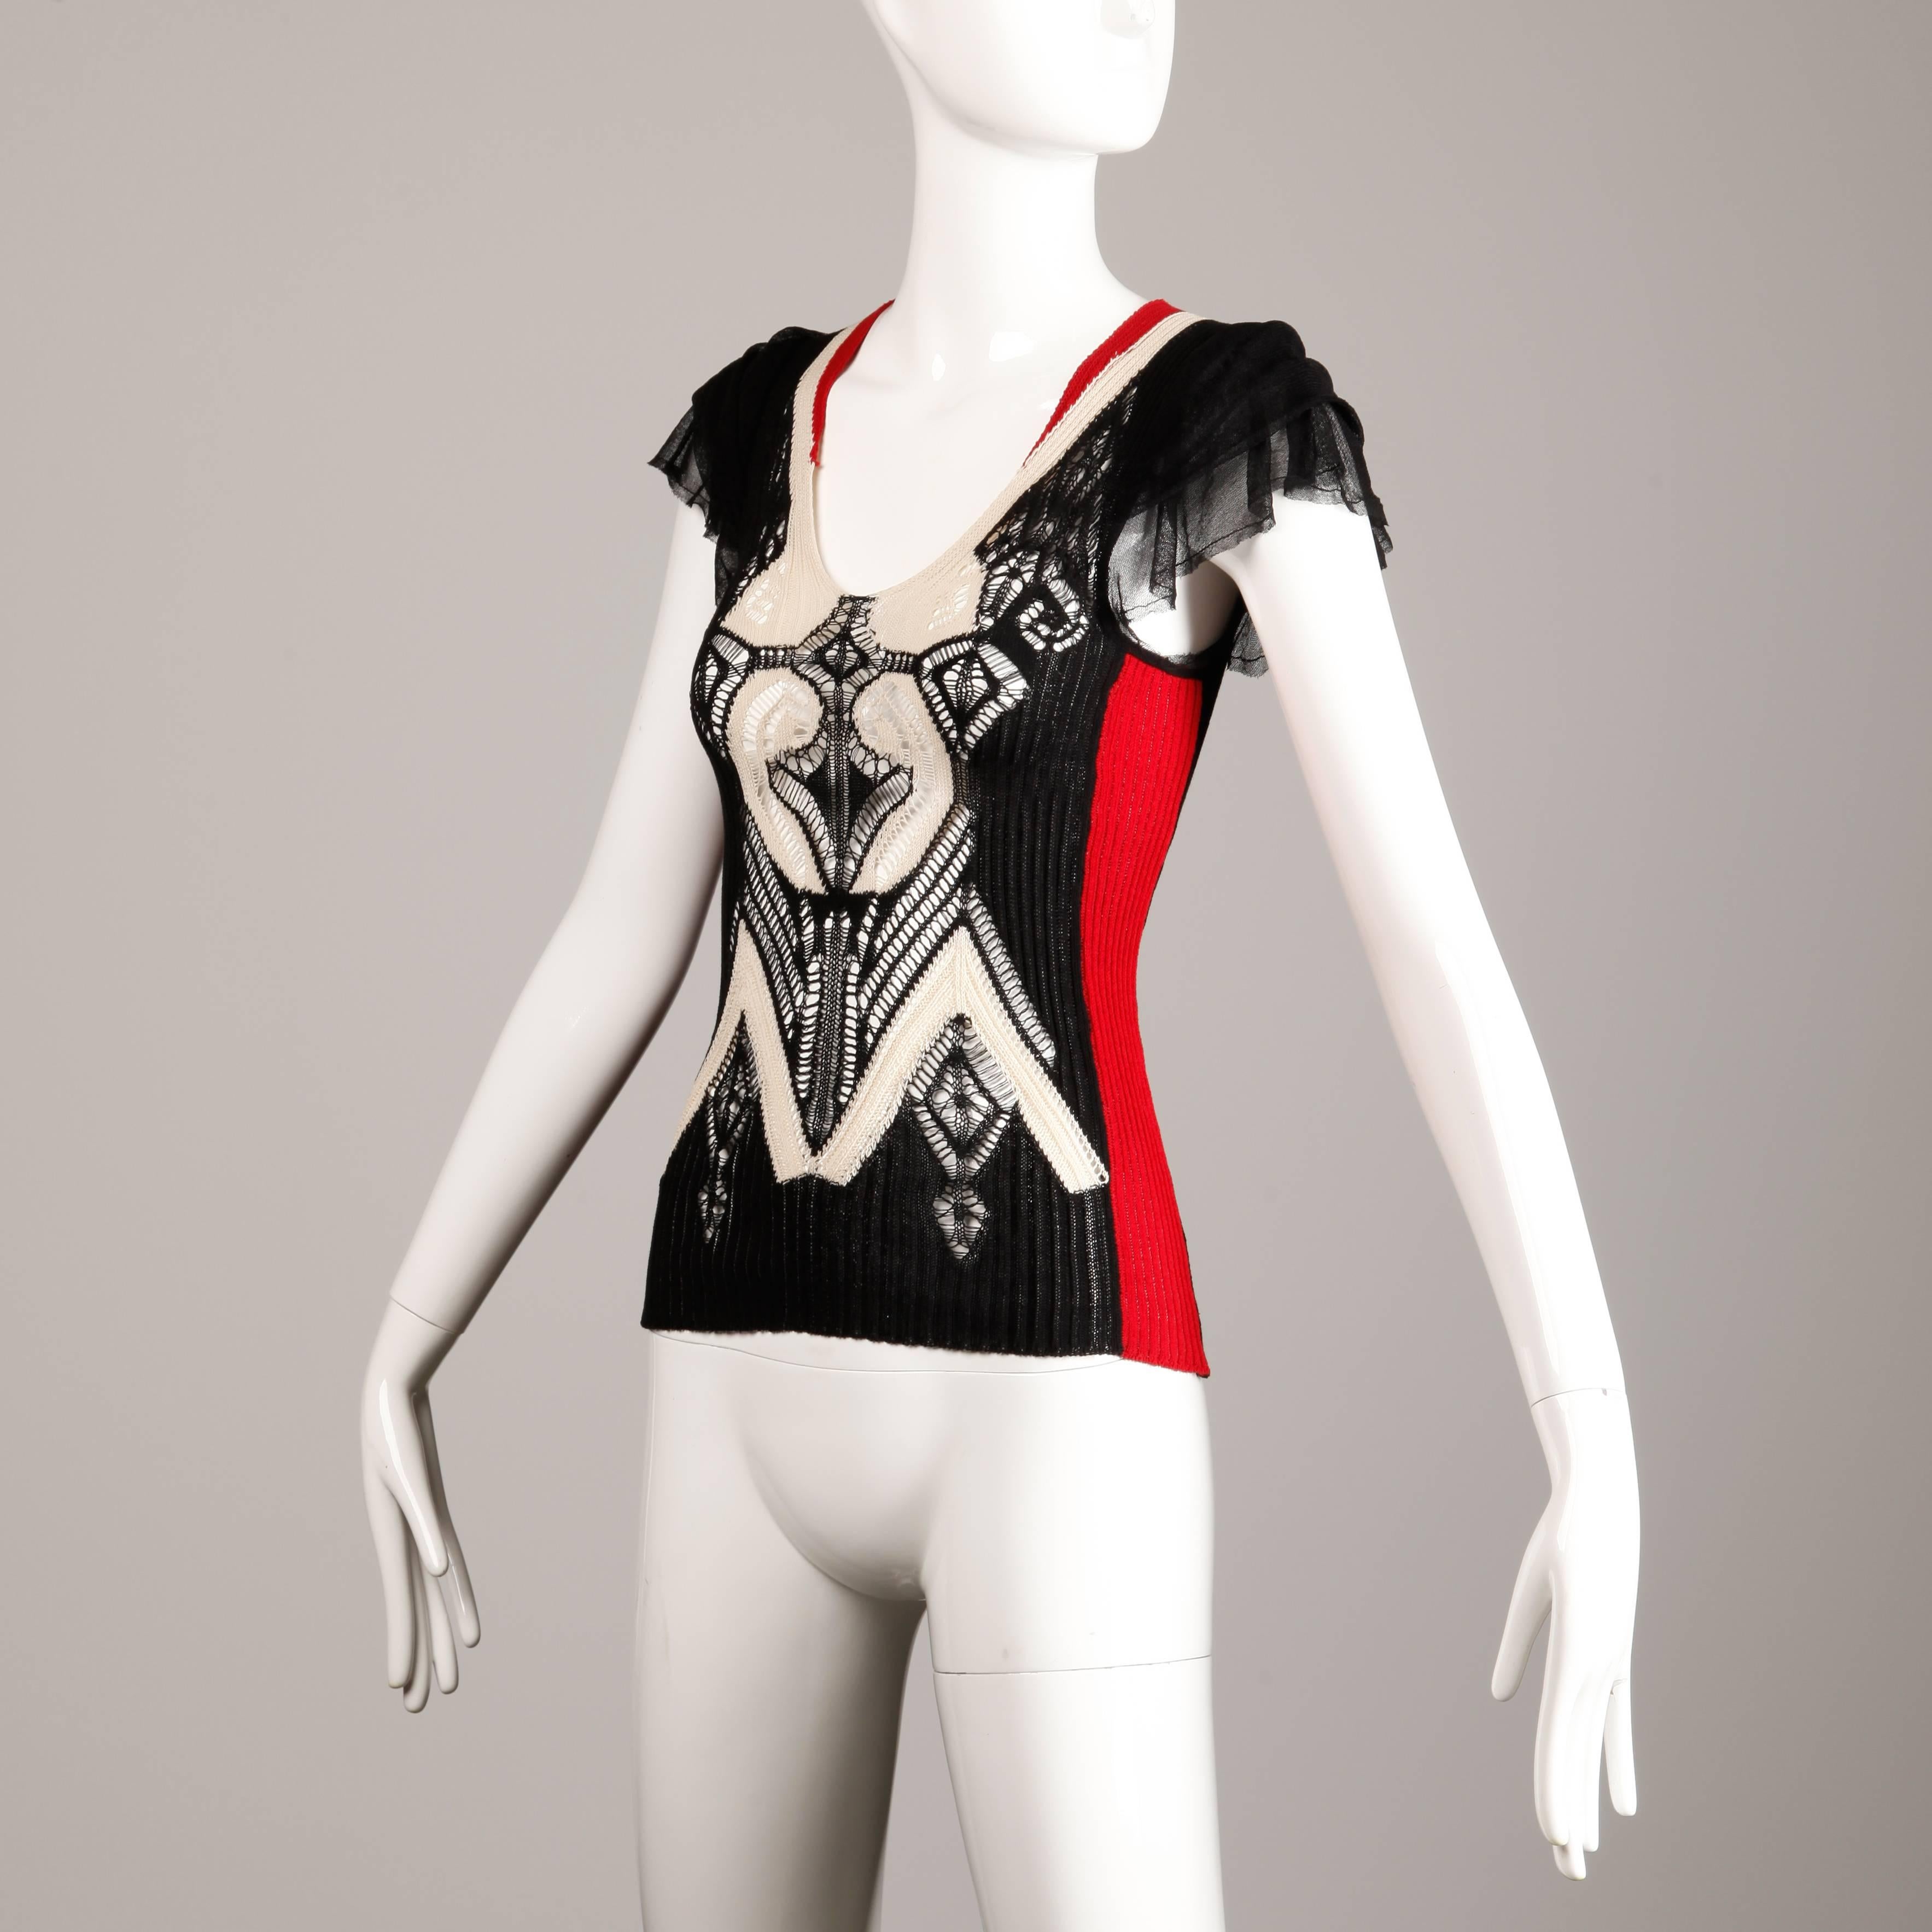 Fantastic Jean Paul Gaultier knit top with black mesh flutter sleeves in red, black and cream. The fabric content is 80% cotton, 15% silk, and 5% elastane. Marked size small and the top fits true to size. The bust measures 28-34", waist